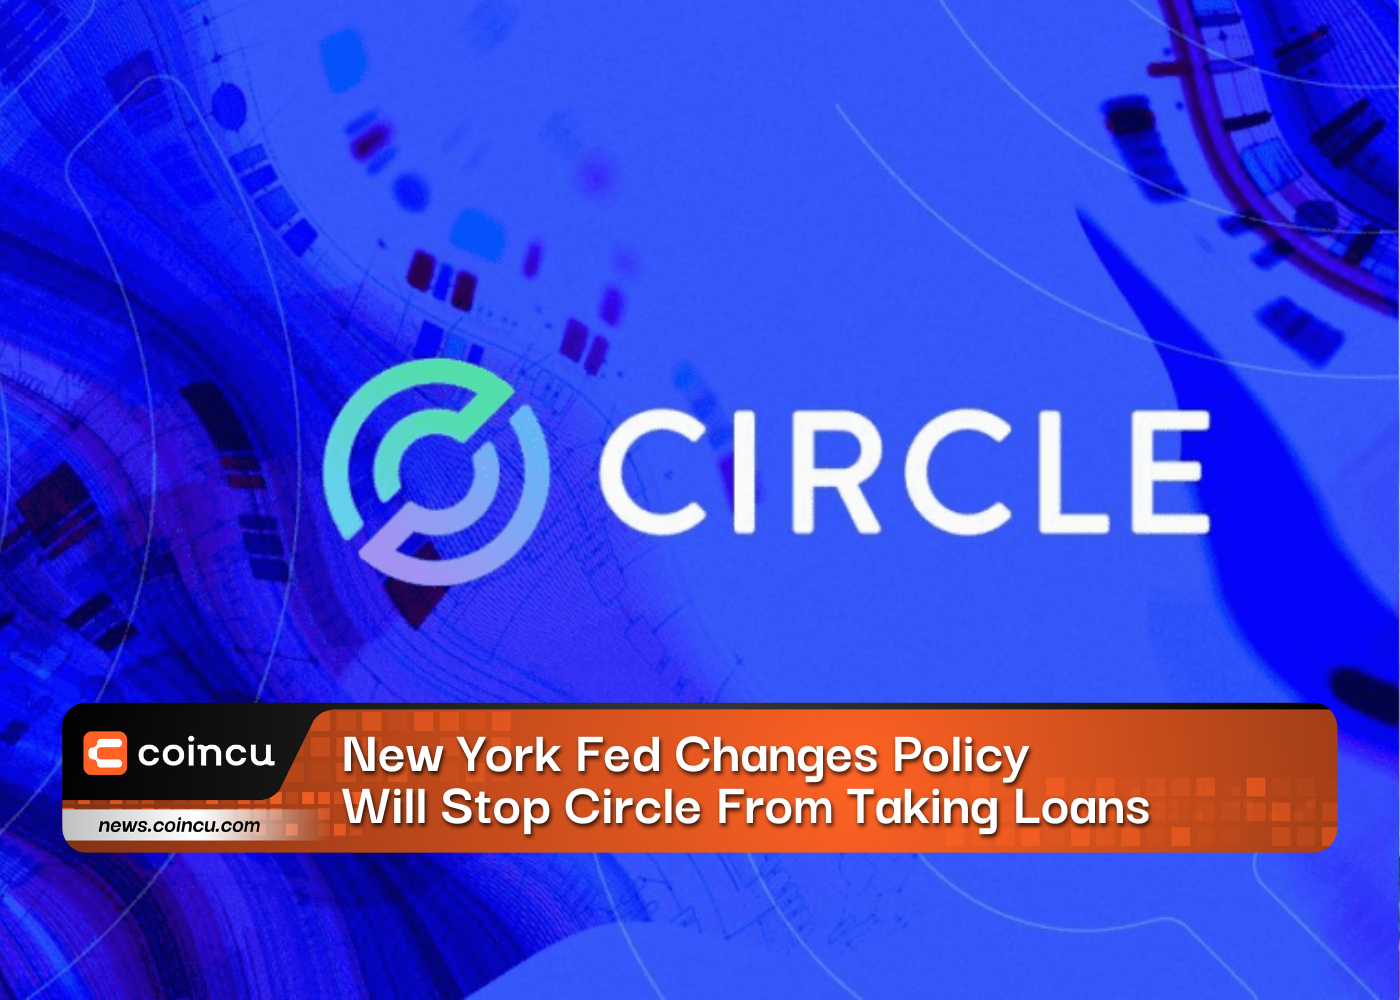 New York Fed Changes Policy Will Stop Circle From Taking Loans